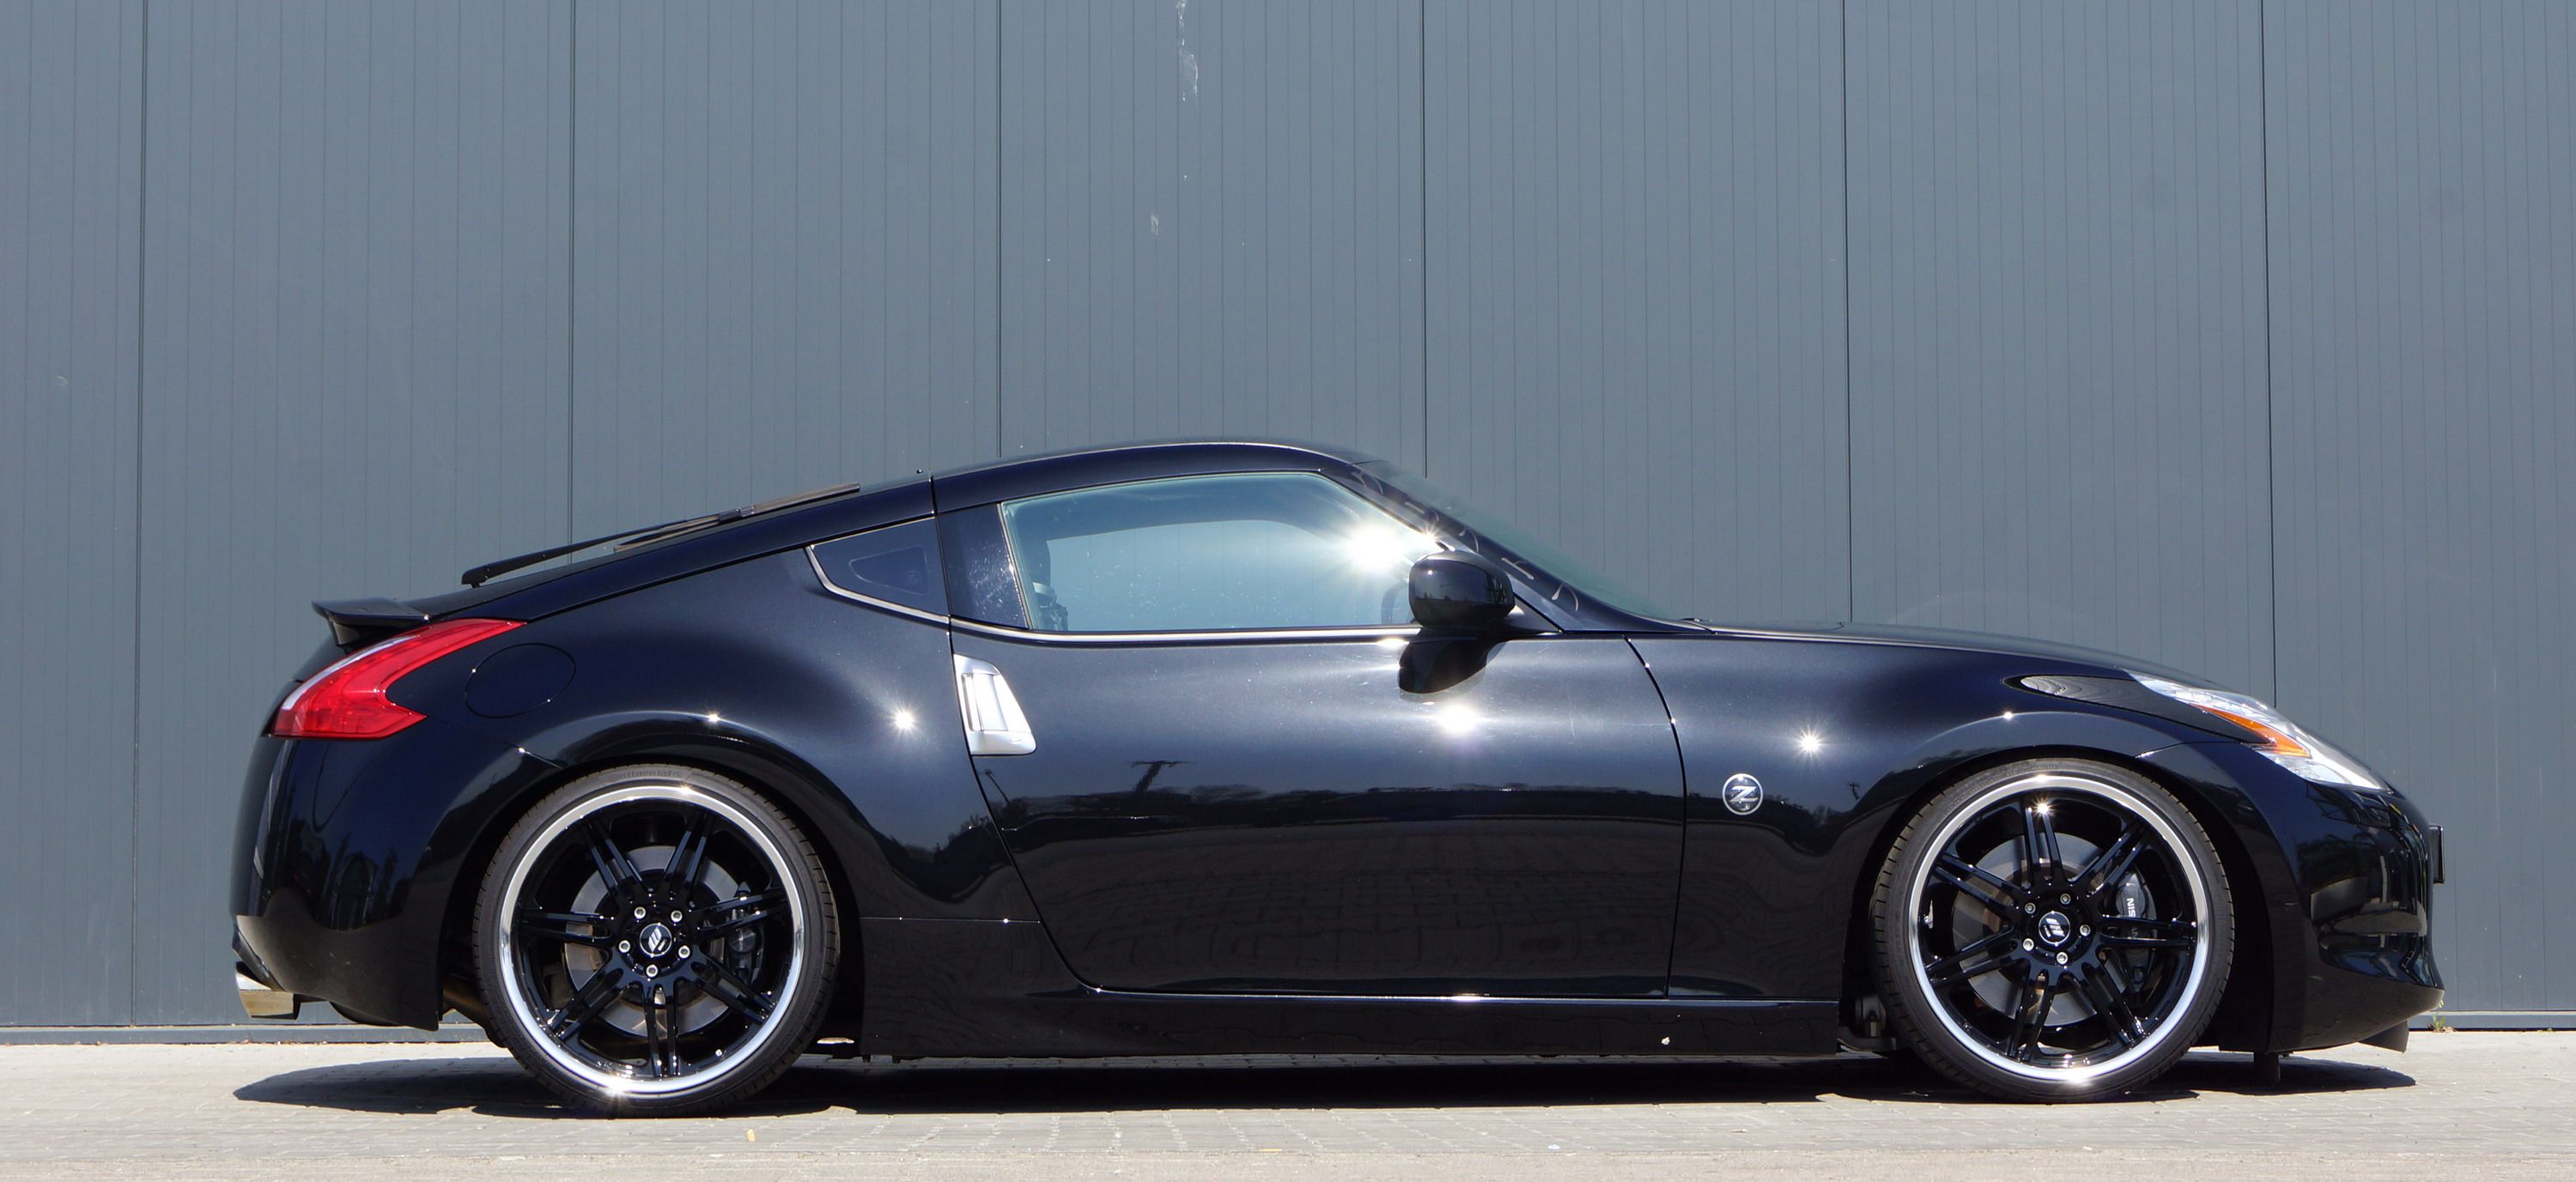 2013 Nissan 370Z by Senner Tuning